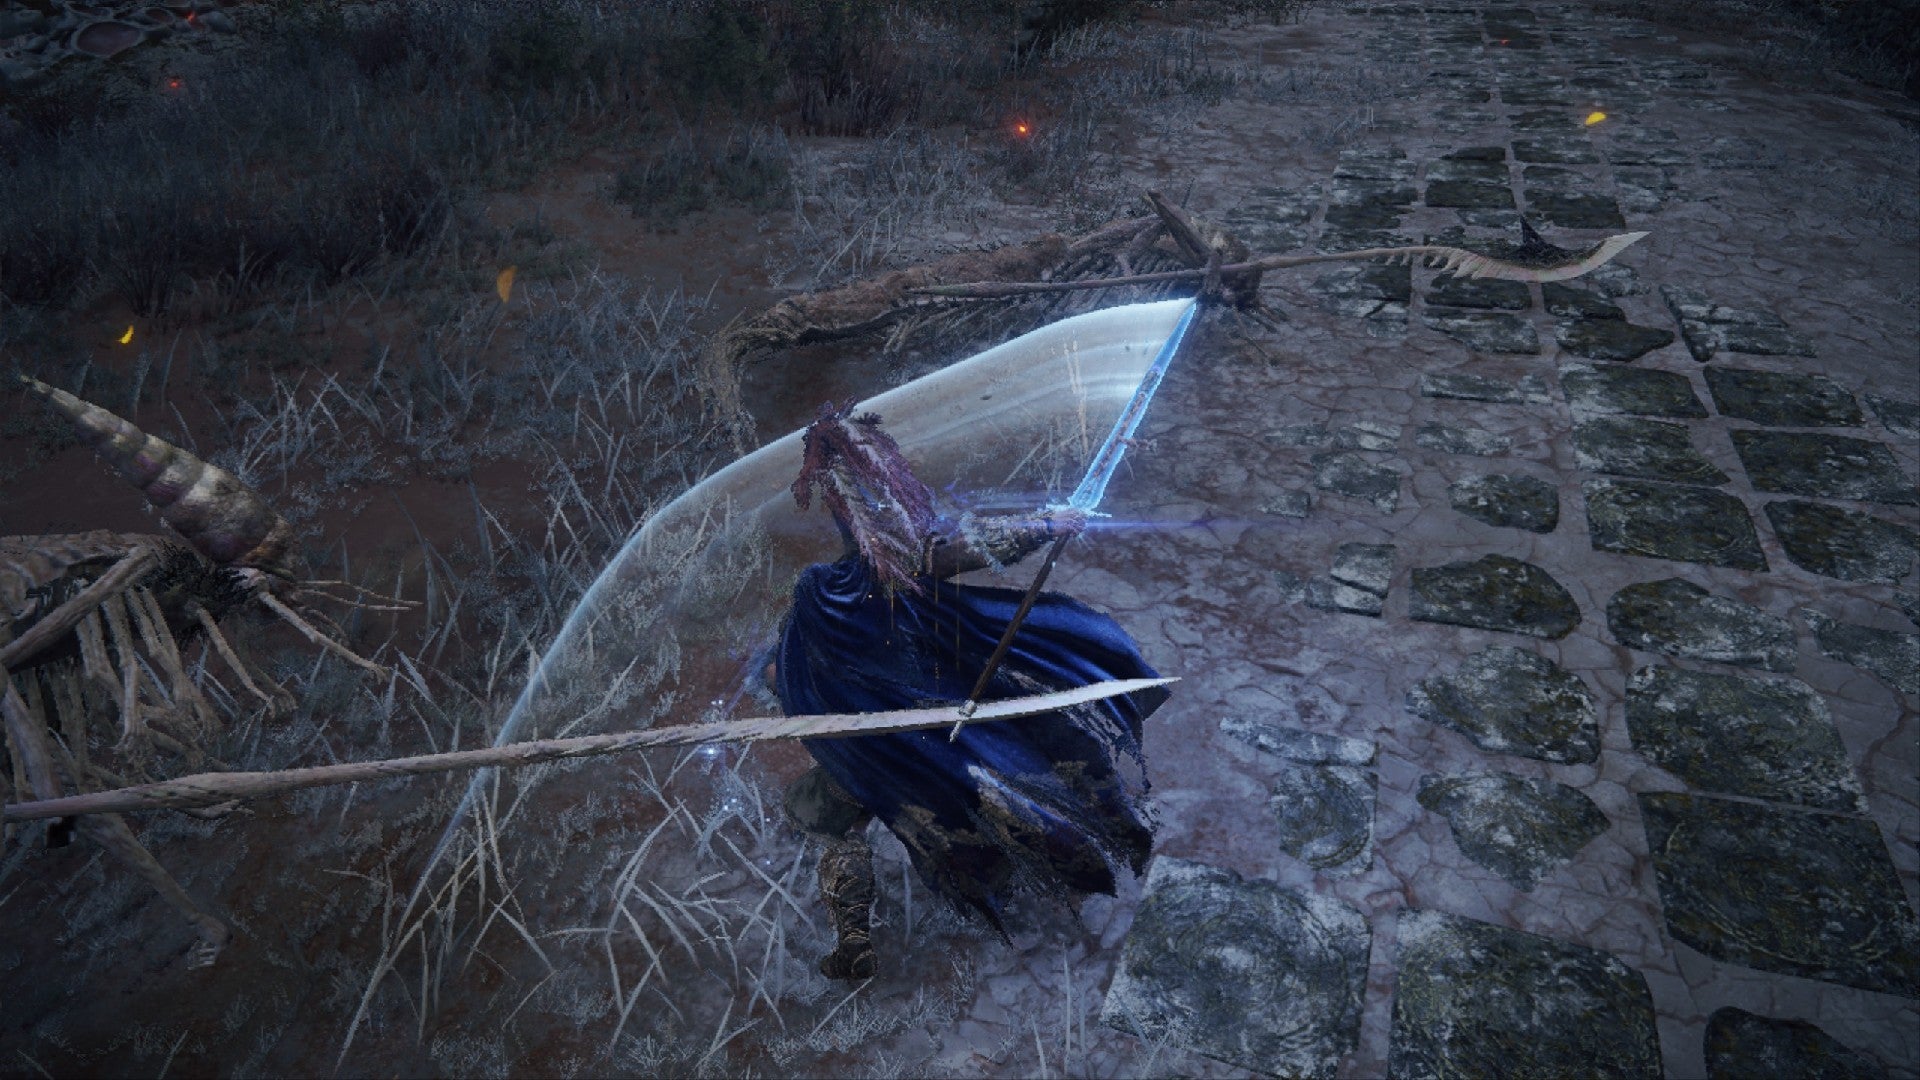 Elden Ring player in cuckoo knight armor swinging the carian slicer spectral sword towards a bug-like enemy on a stone path.